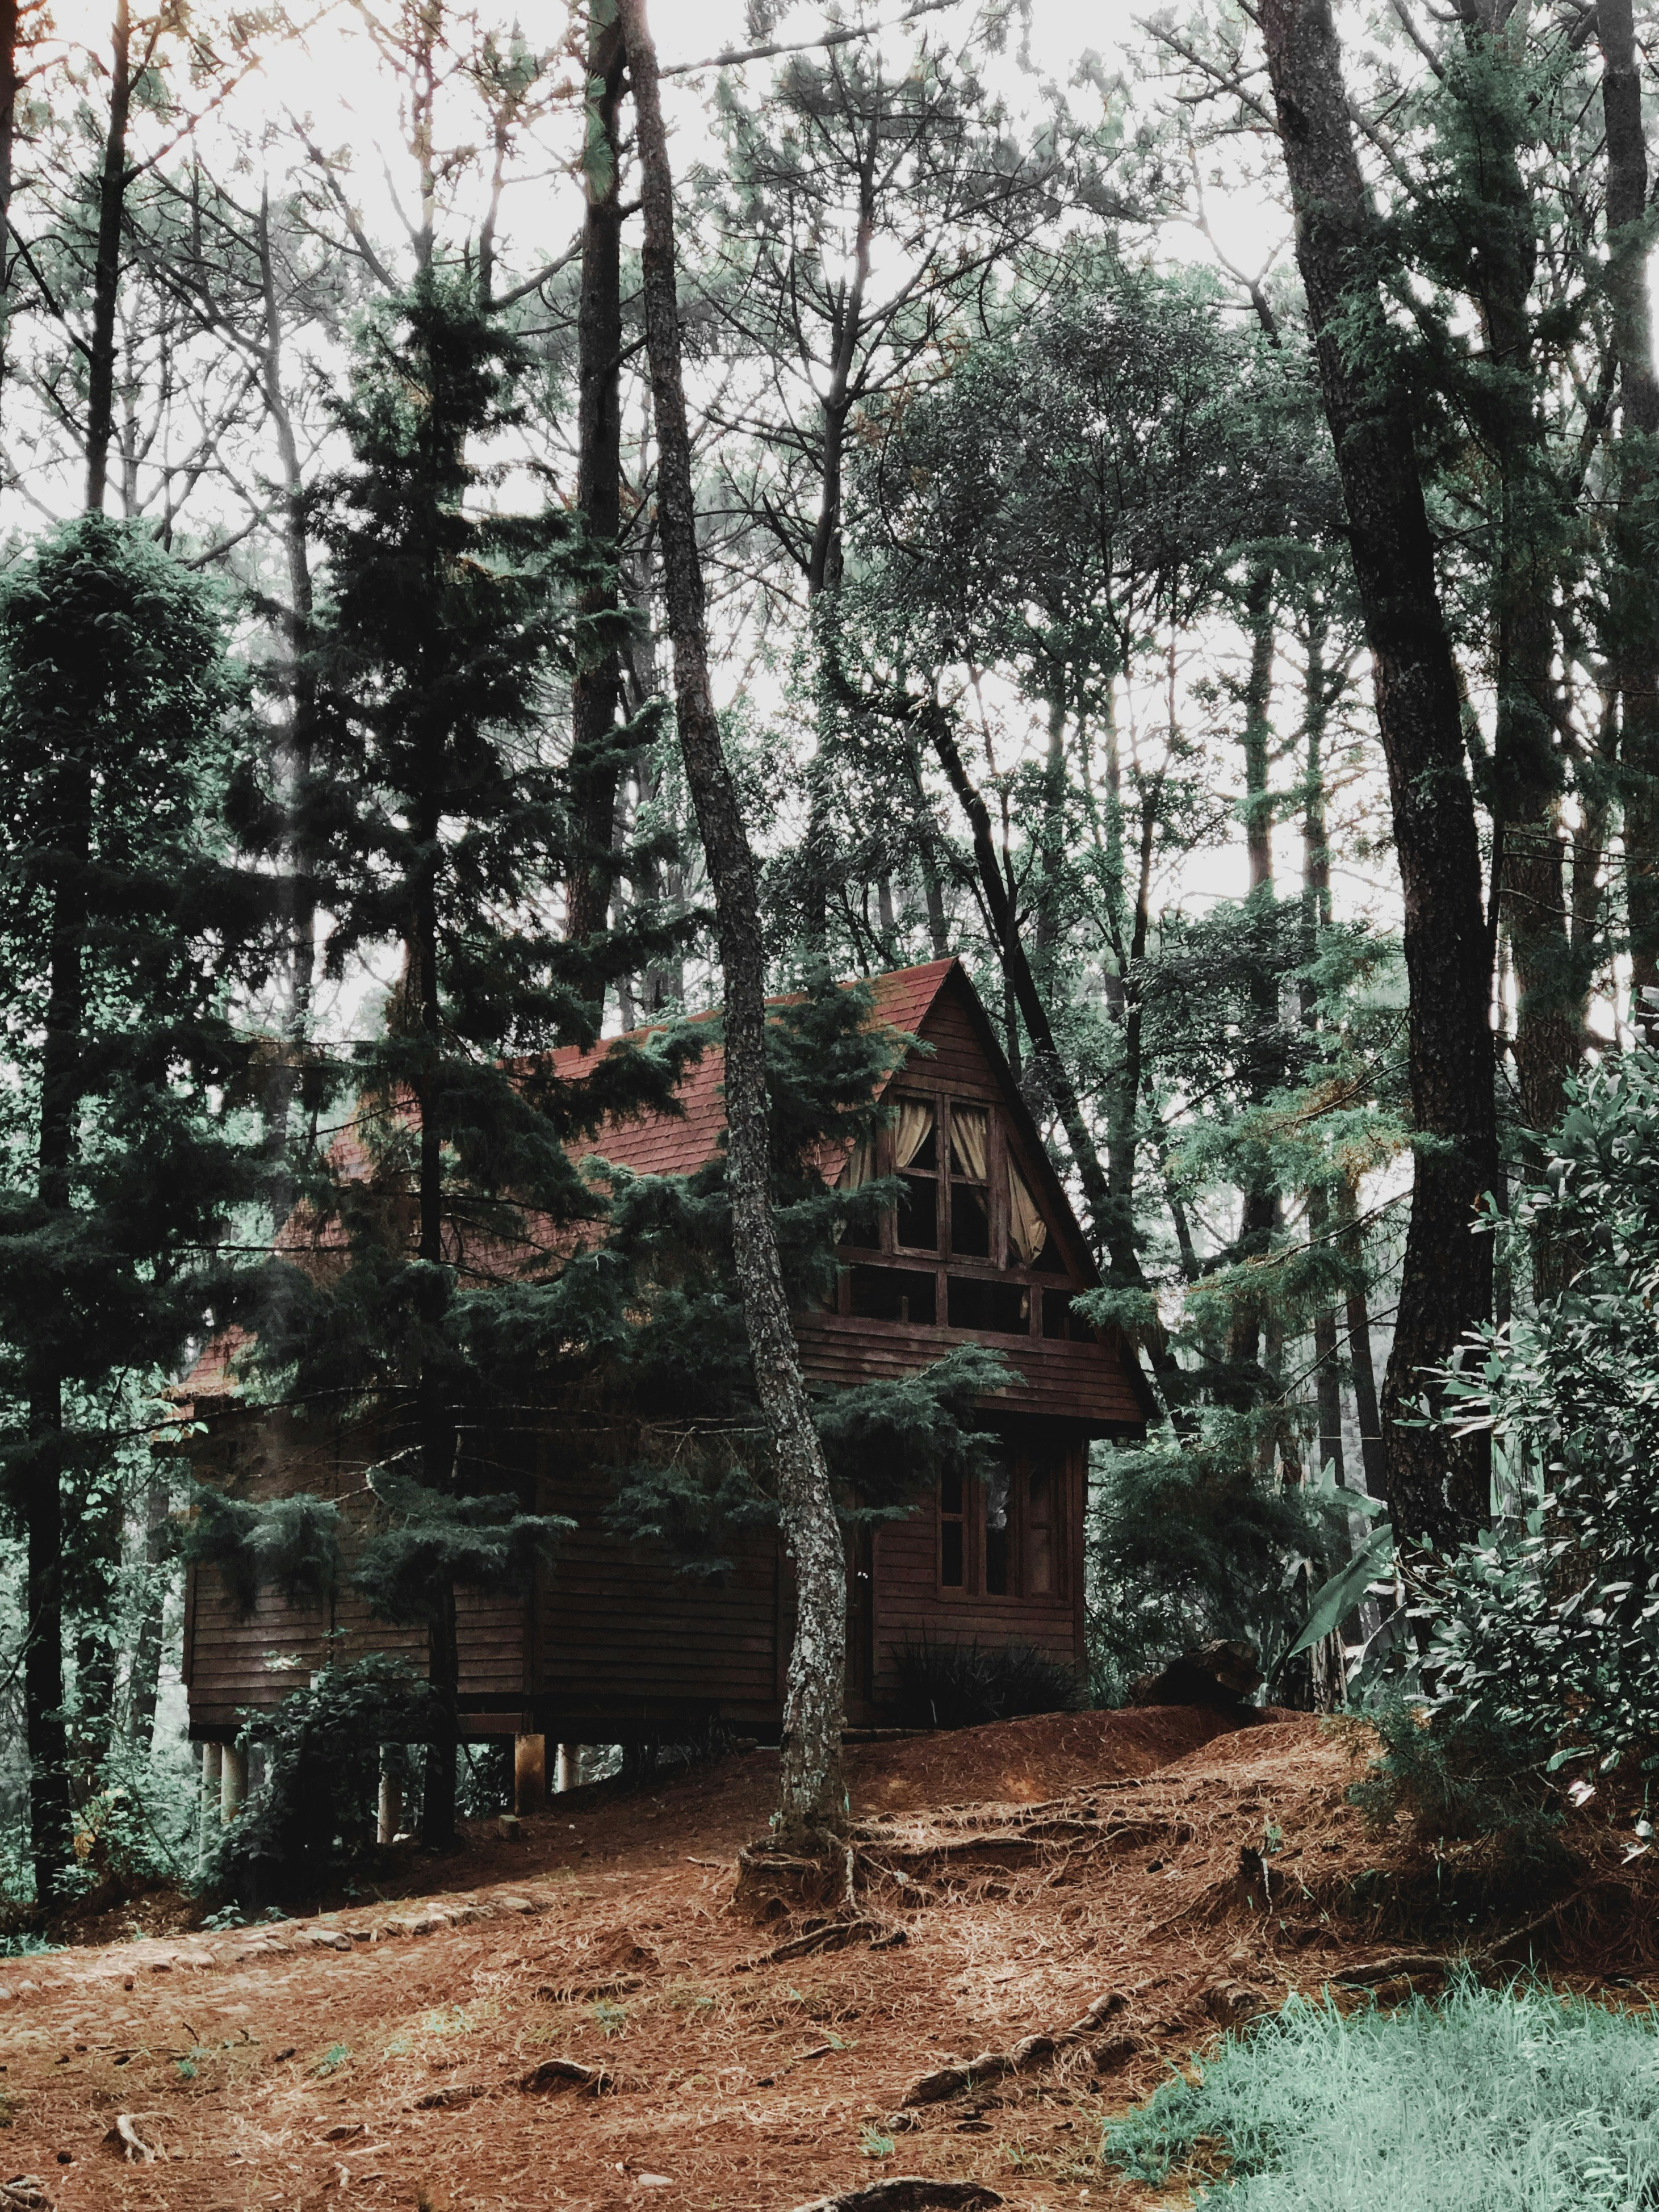 brown wooden house in middle of forest